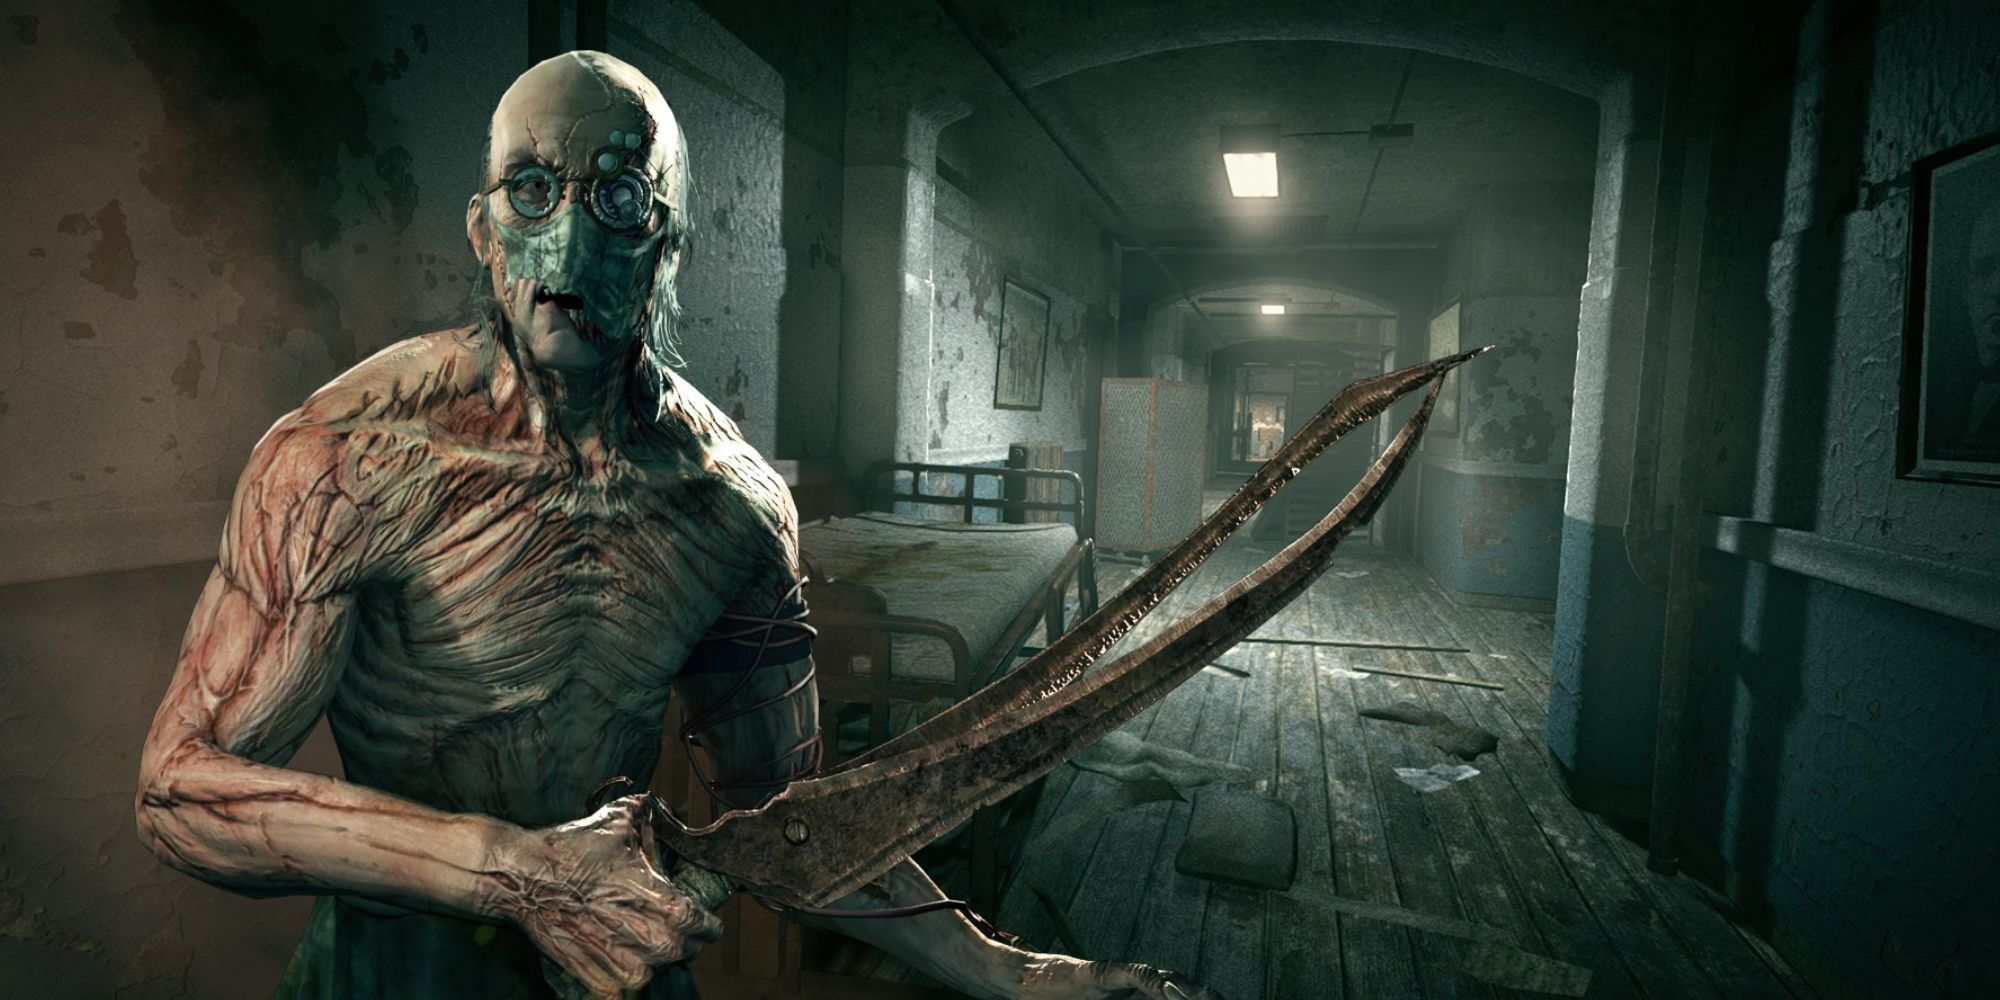 Richard Trager from Outlast holding a weapon as he chases Miles Upshur